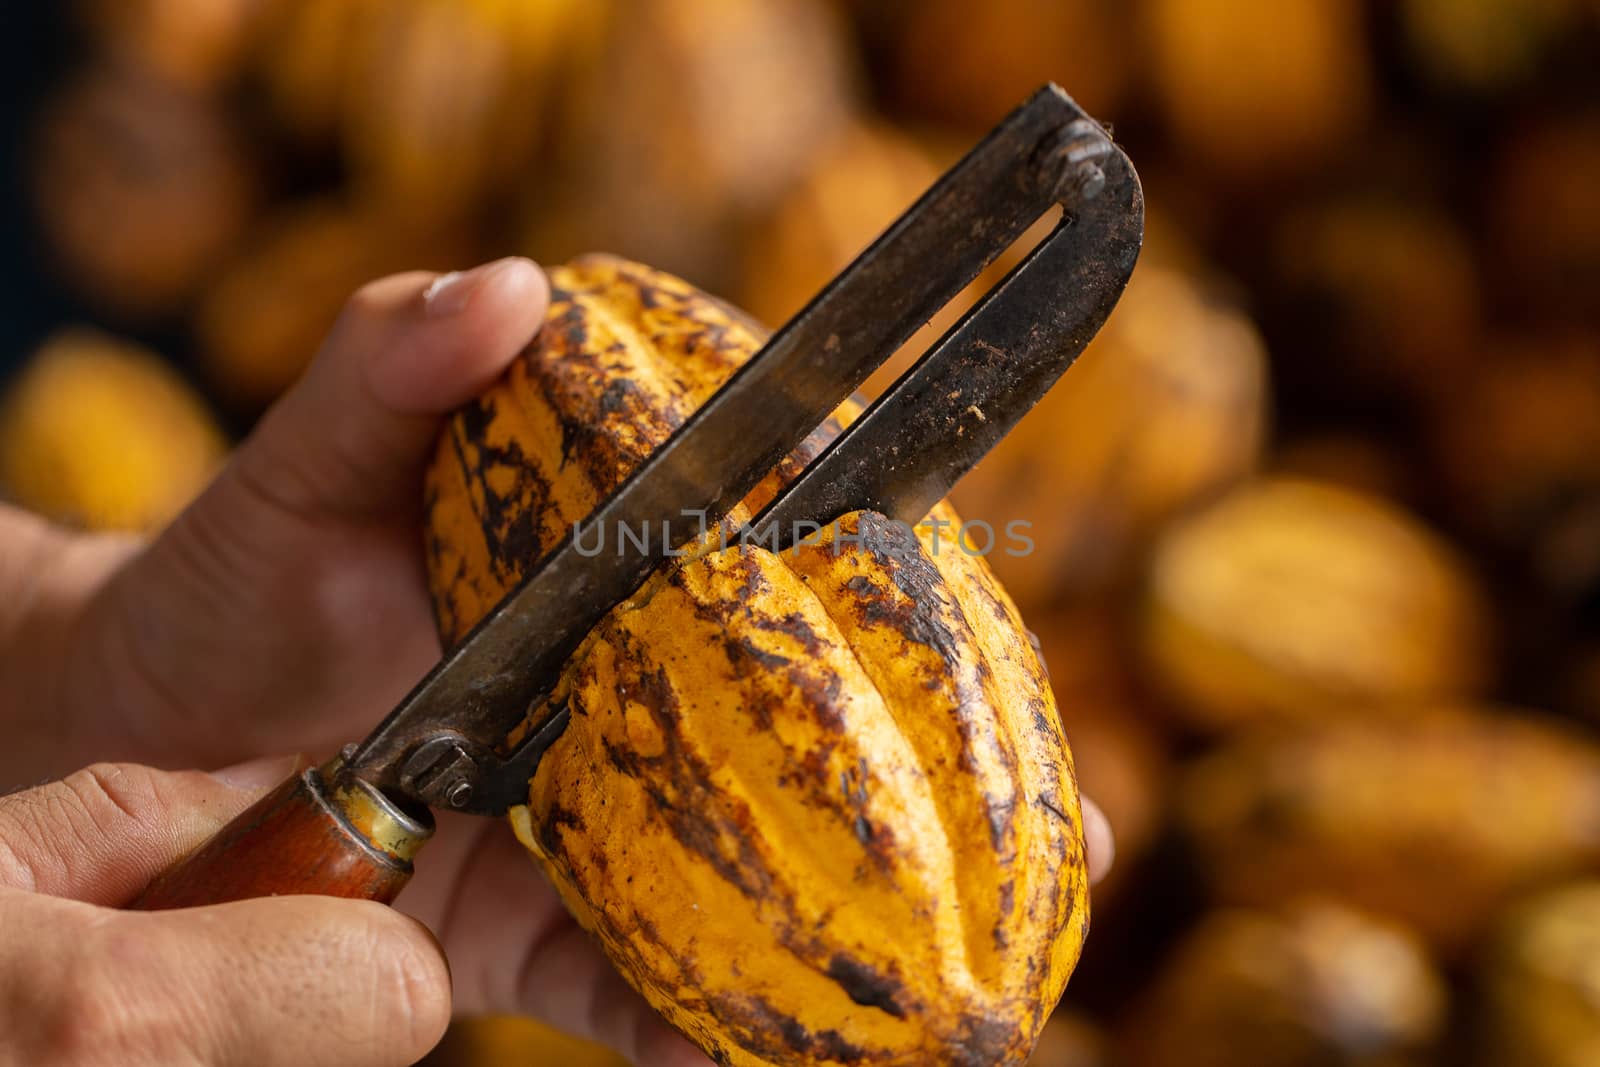 Cocoa beans and cocoa pod on a wooden surface